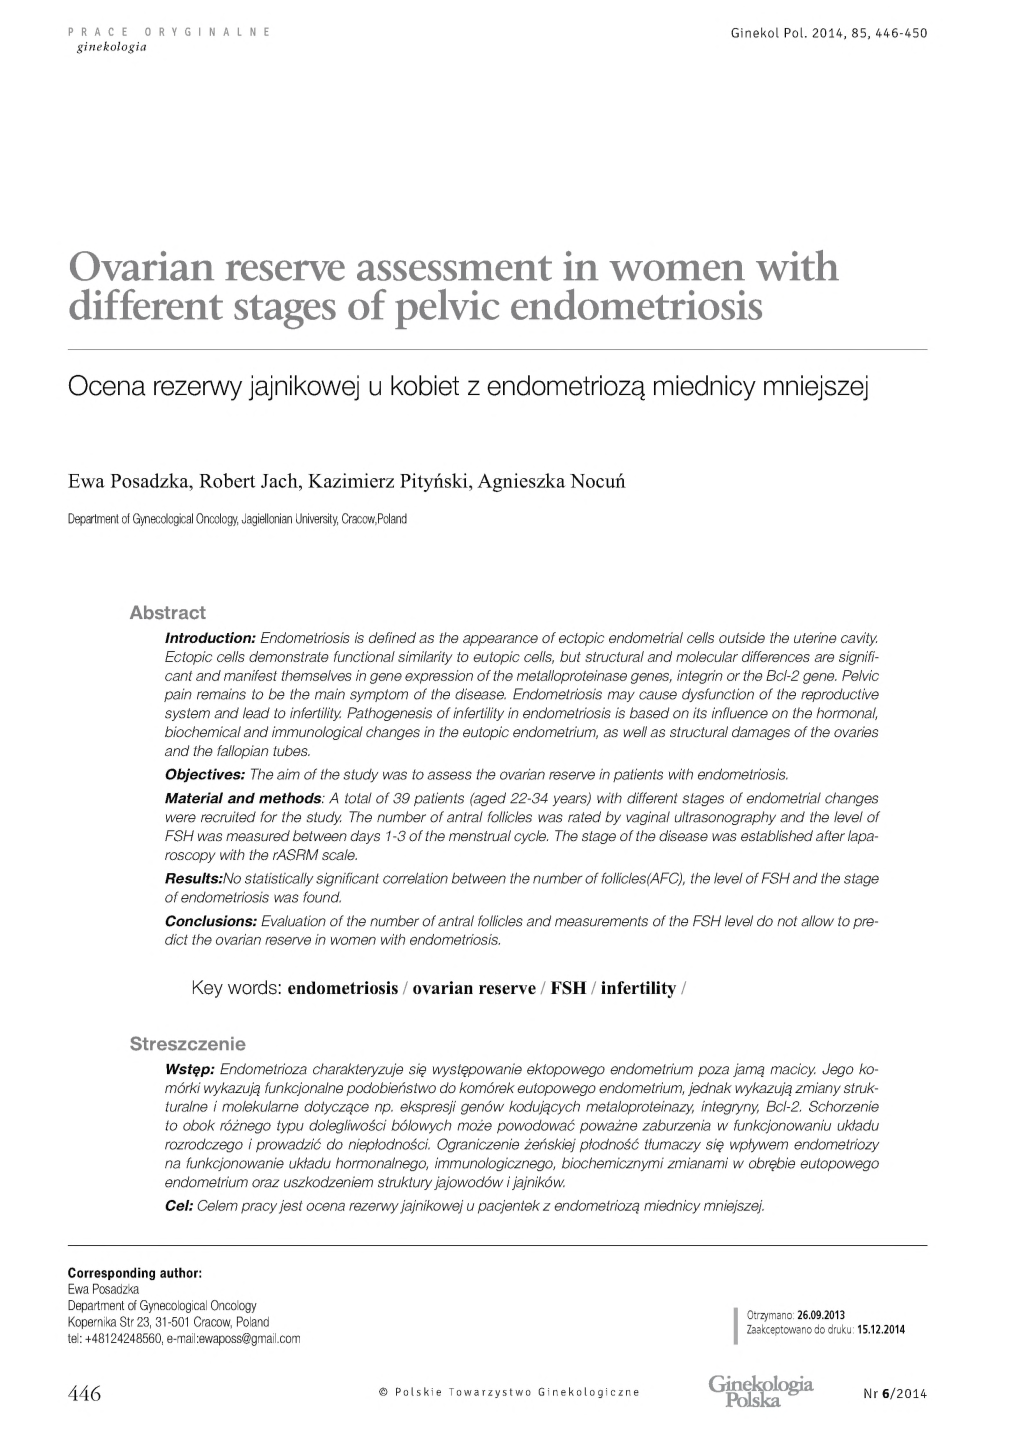 Ovarian Reserve Assessment in Women with Different Stages of Pelvic Endometriosis